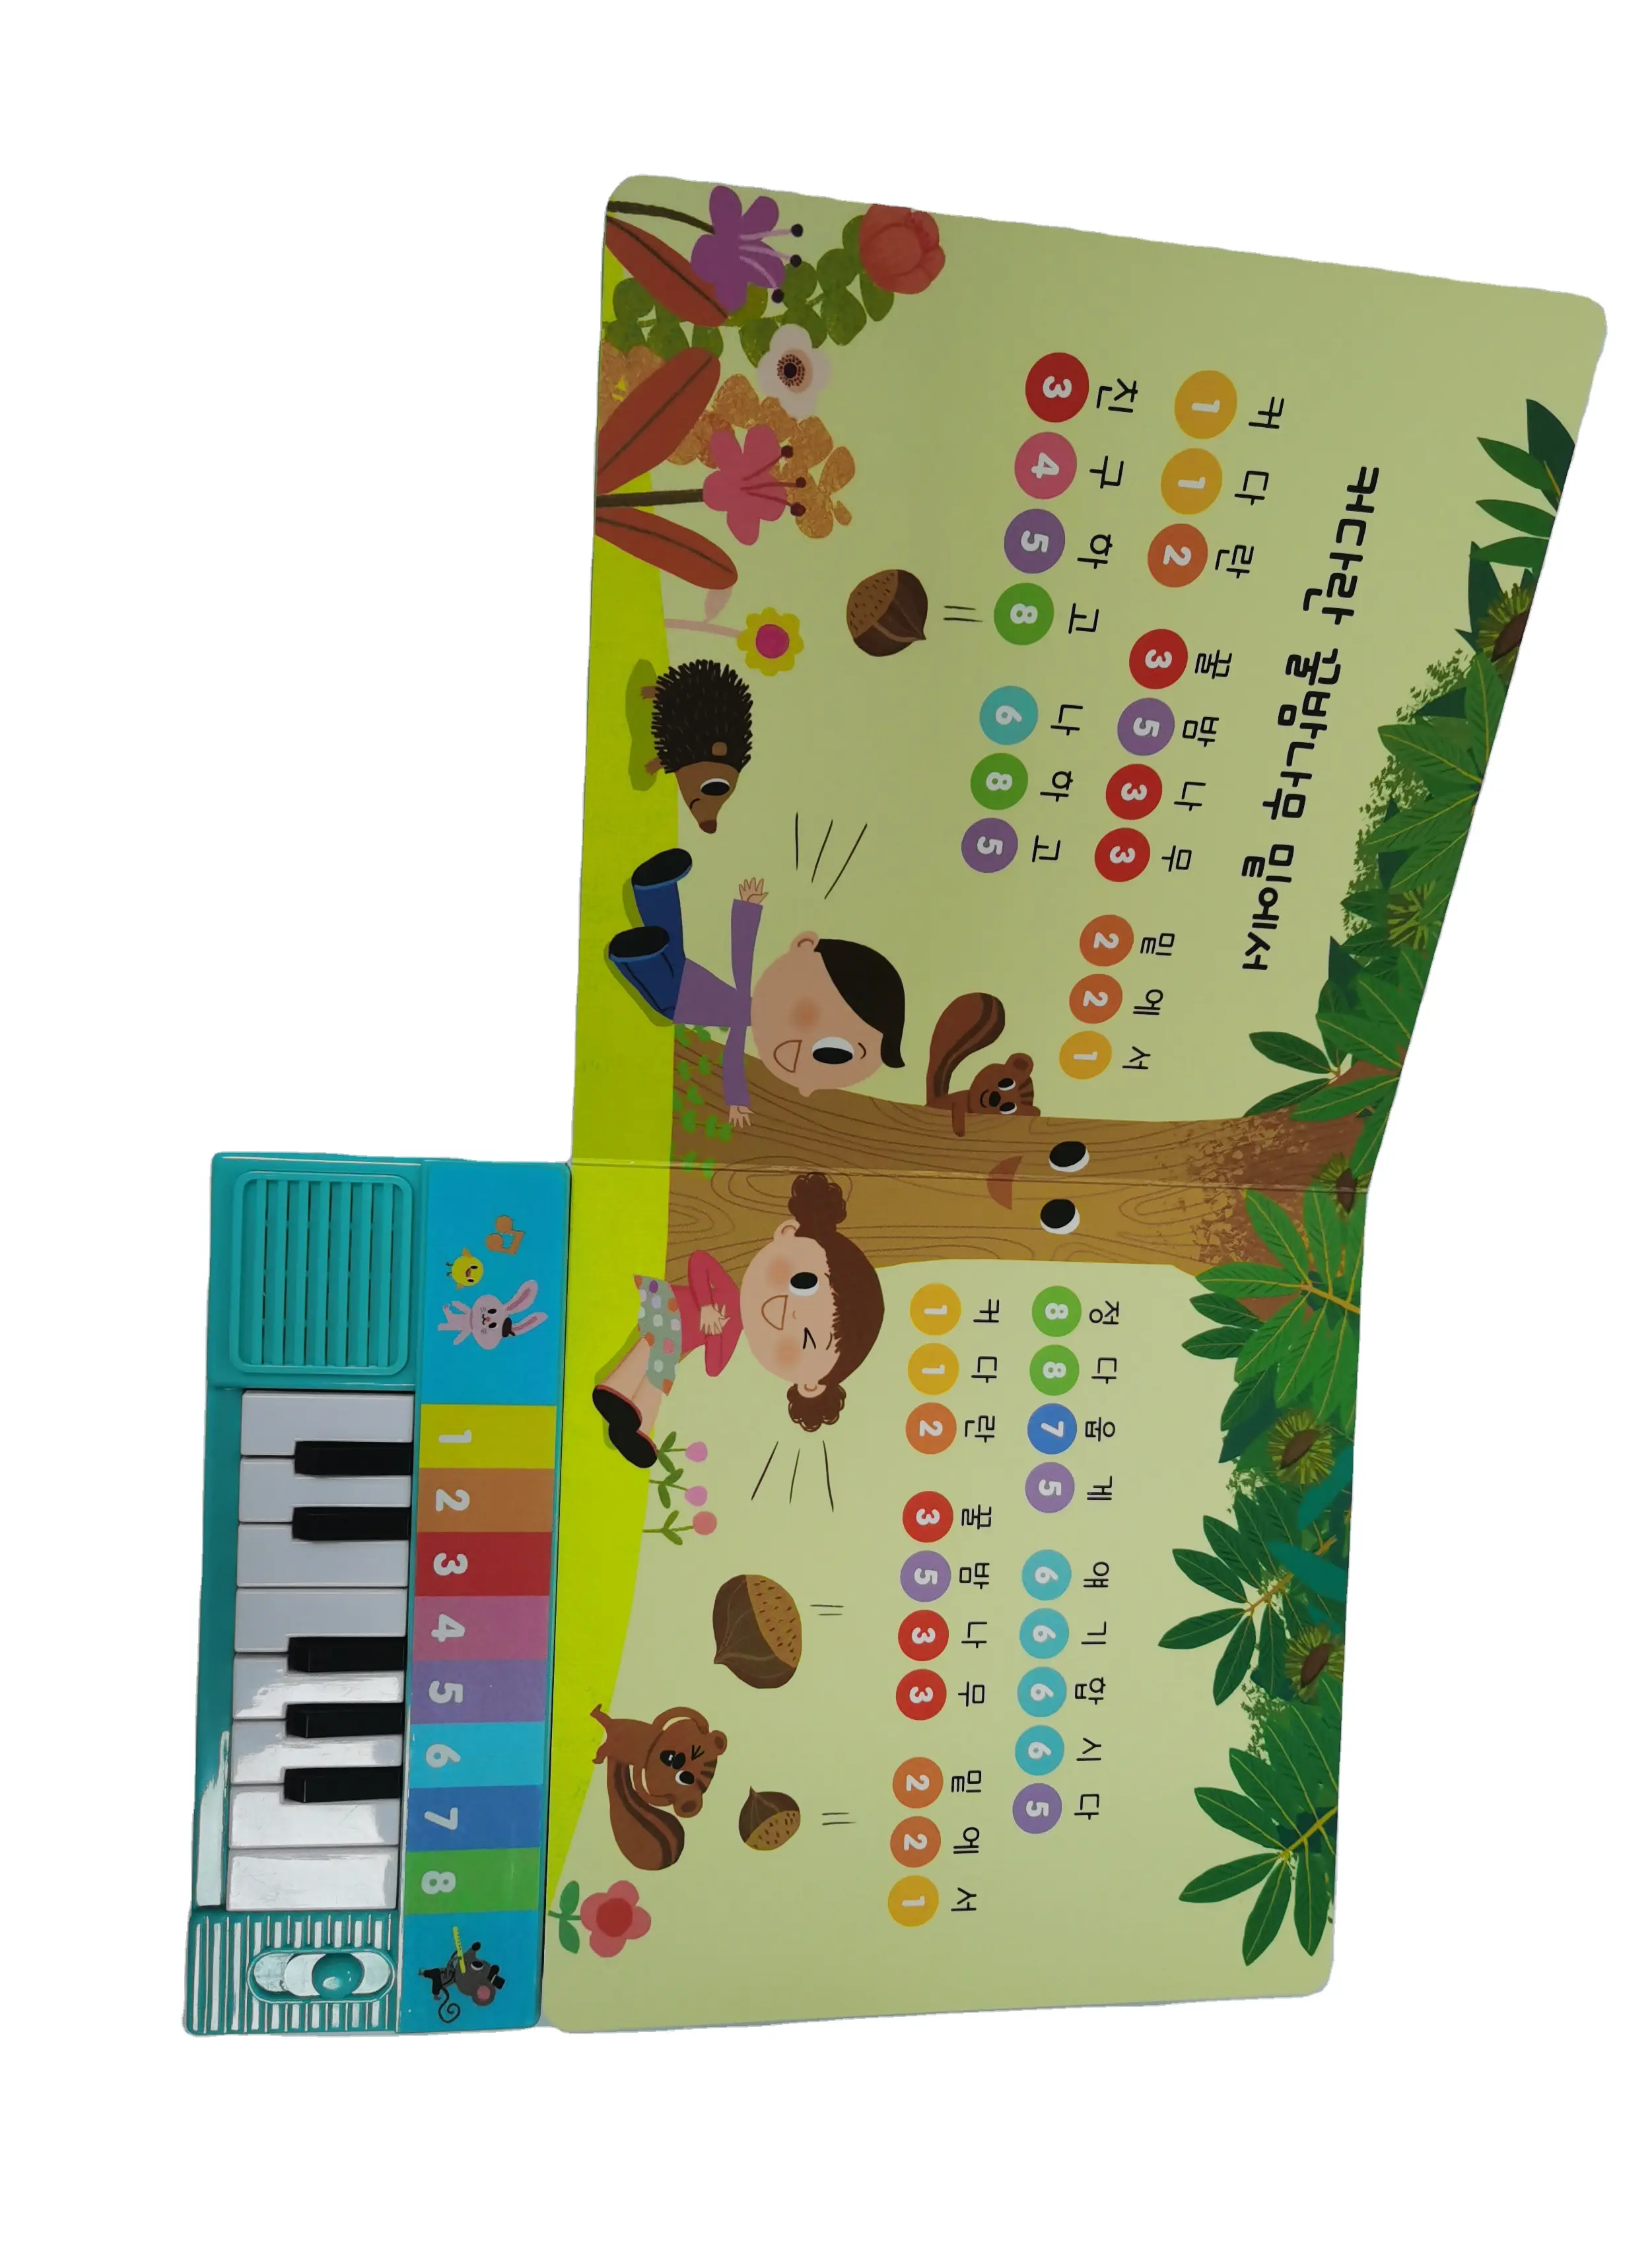 New Arrival Interactive Educational Music Keyboards Electronic Sound Piano Books